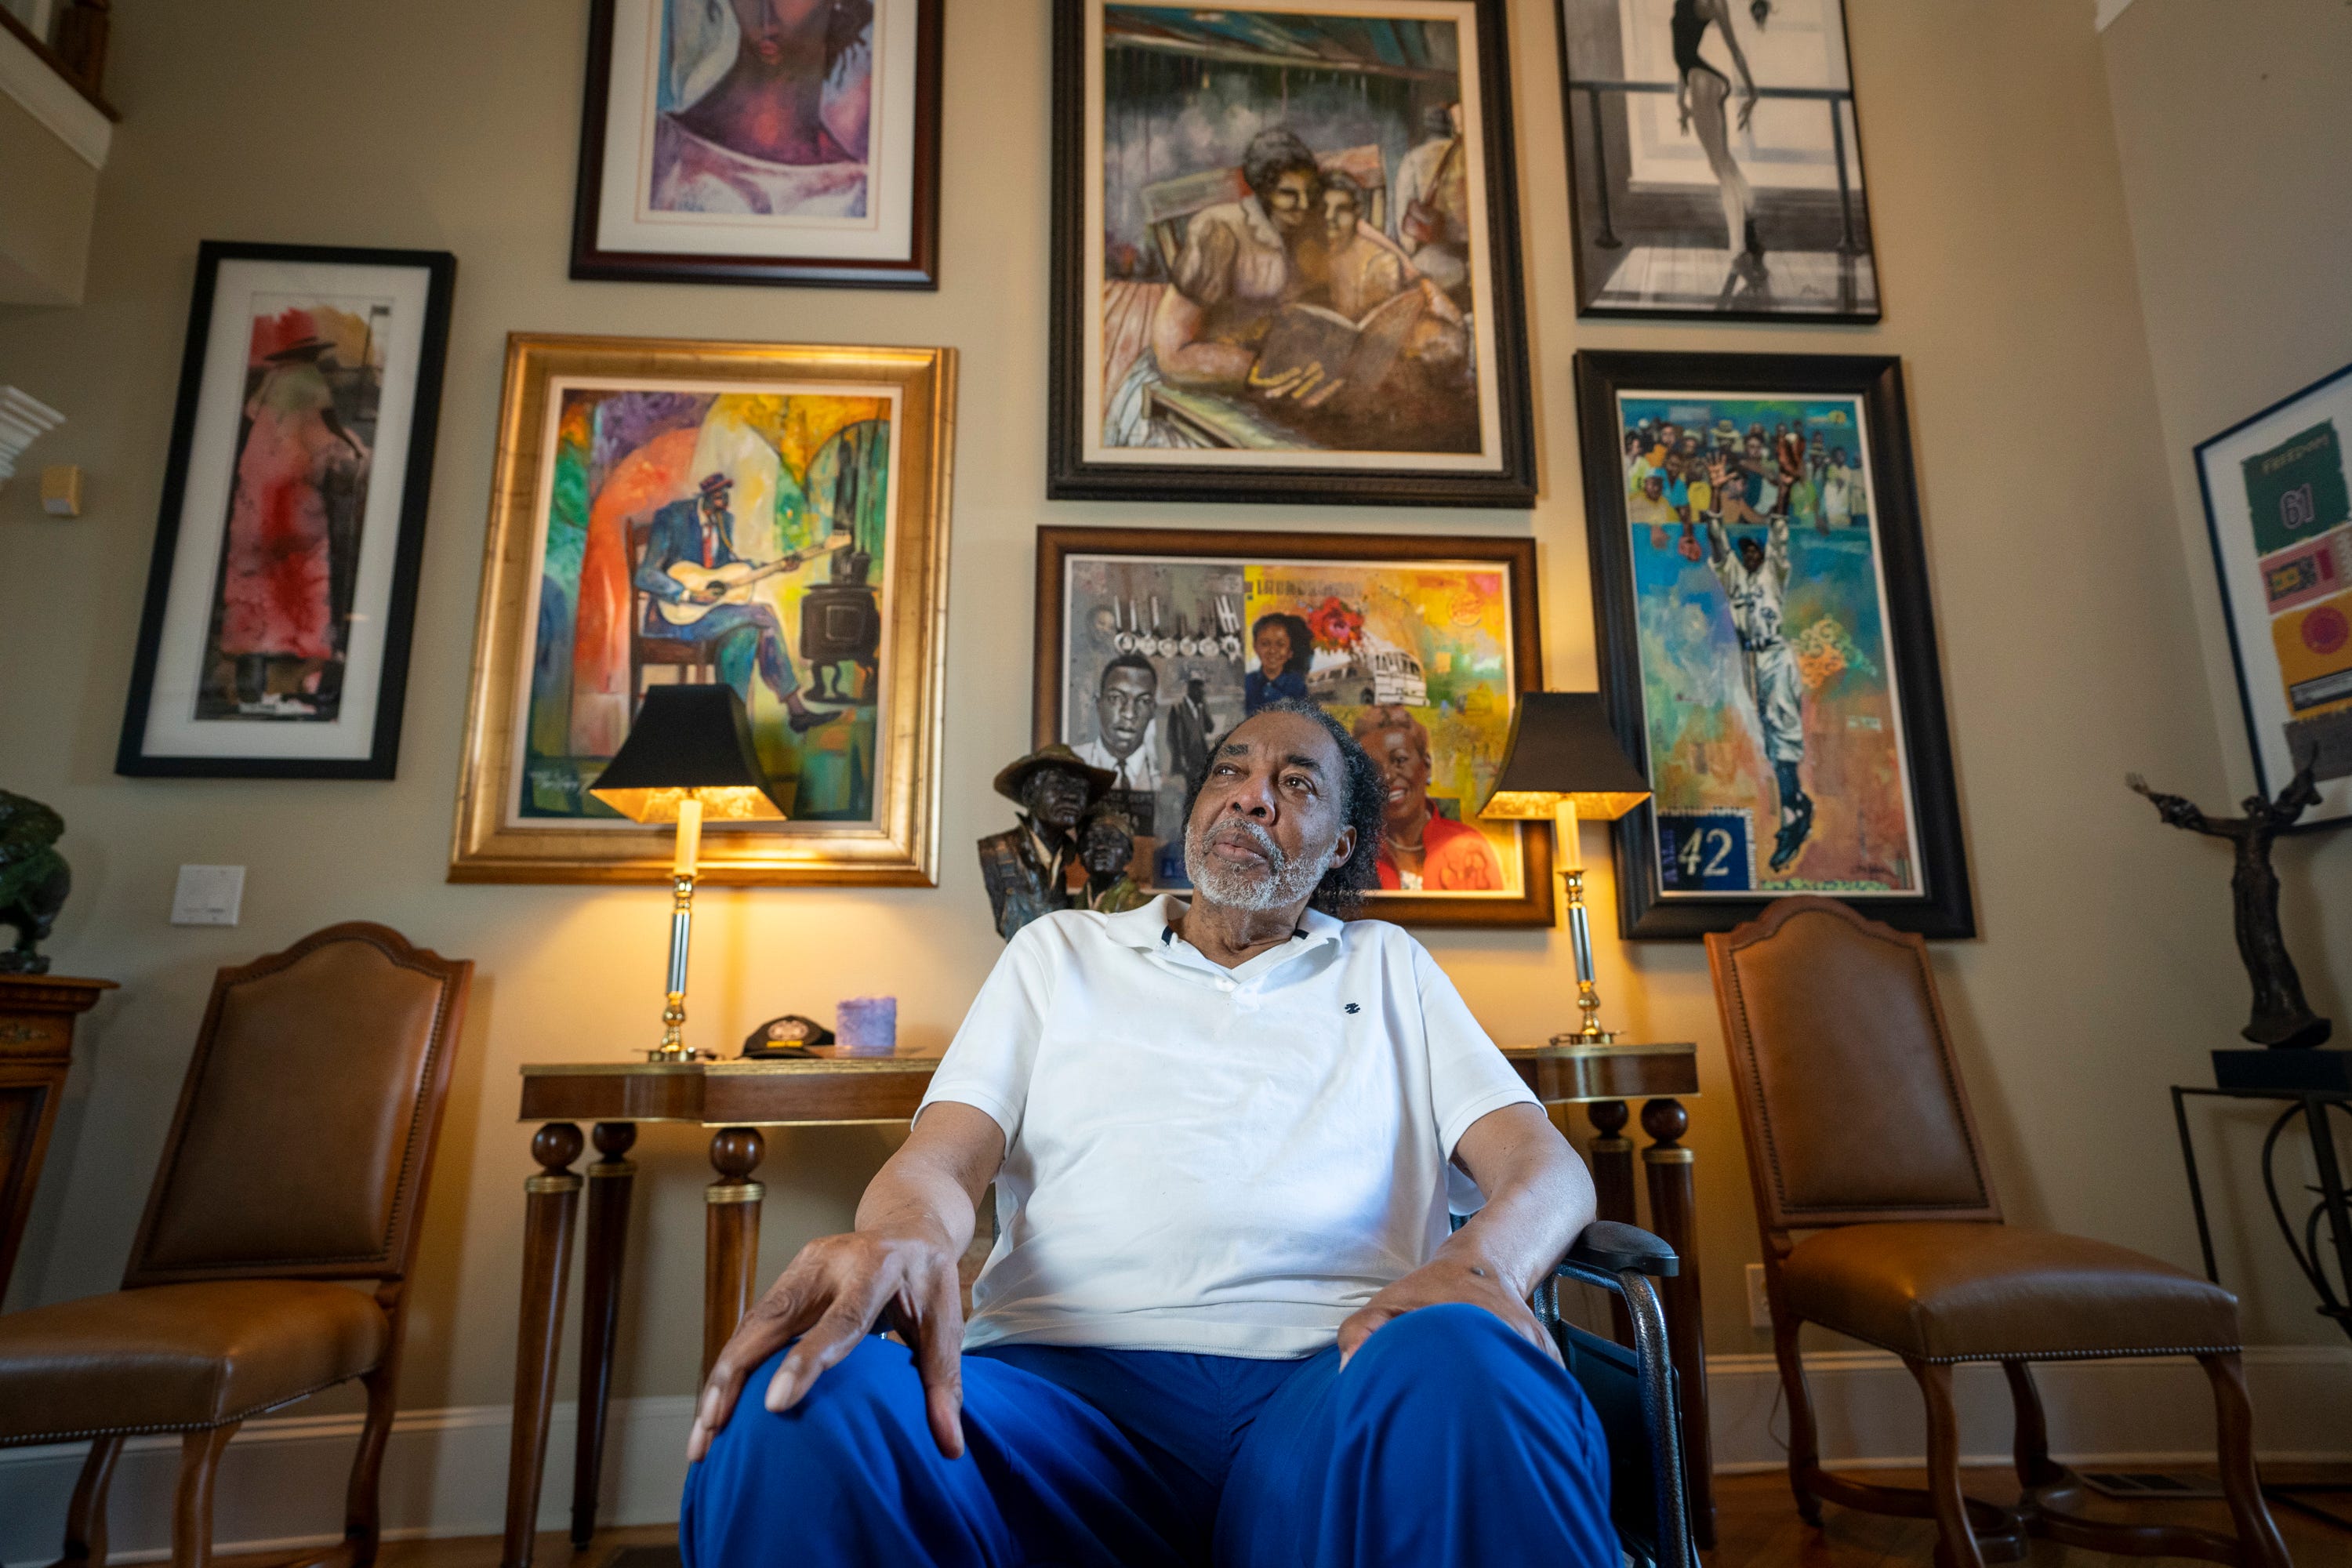 Hank Thomas, a Freedom Rider who survived the firebombing of a bus he was on in 1961, sits for a portrait in his home in Stone Mountain, Ga., on Aug. 15, 2021. Eleven days into the Freedom Rides aimed at ending segregation, Thomas and other Freedom Riders huddled on a bus on May 14, 1961, just outside Anniston, Ala., as a white mob slashed tires on their bus, pounded it with tire irons and then threw a firebomb inside.